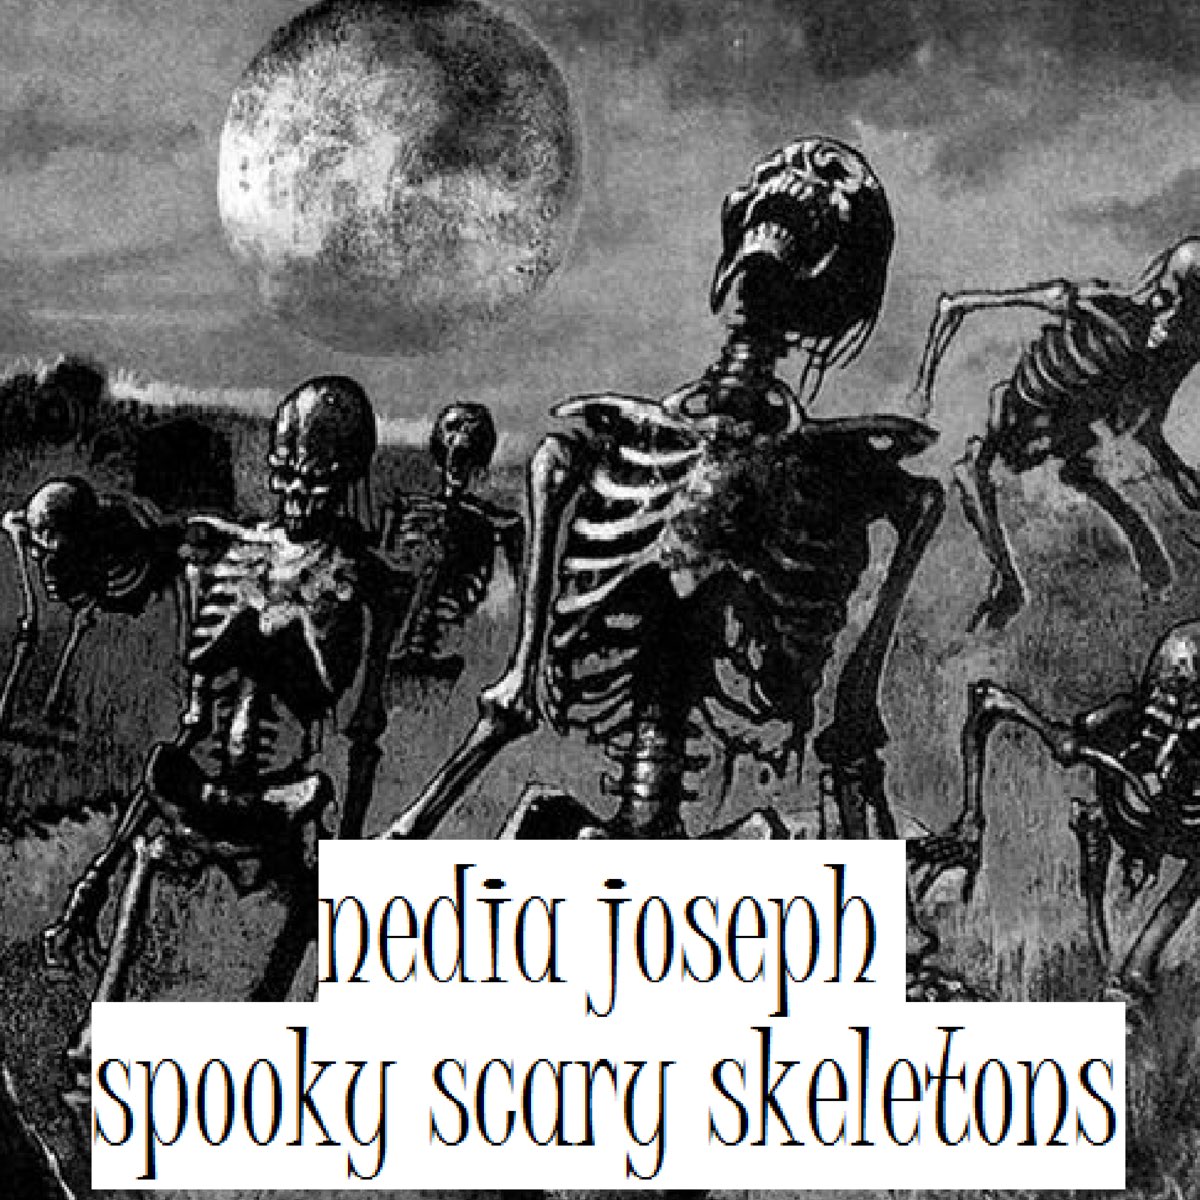 Scary skeleton текст